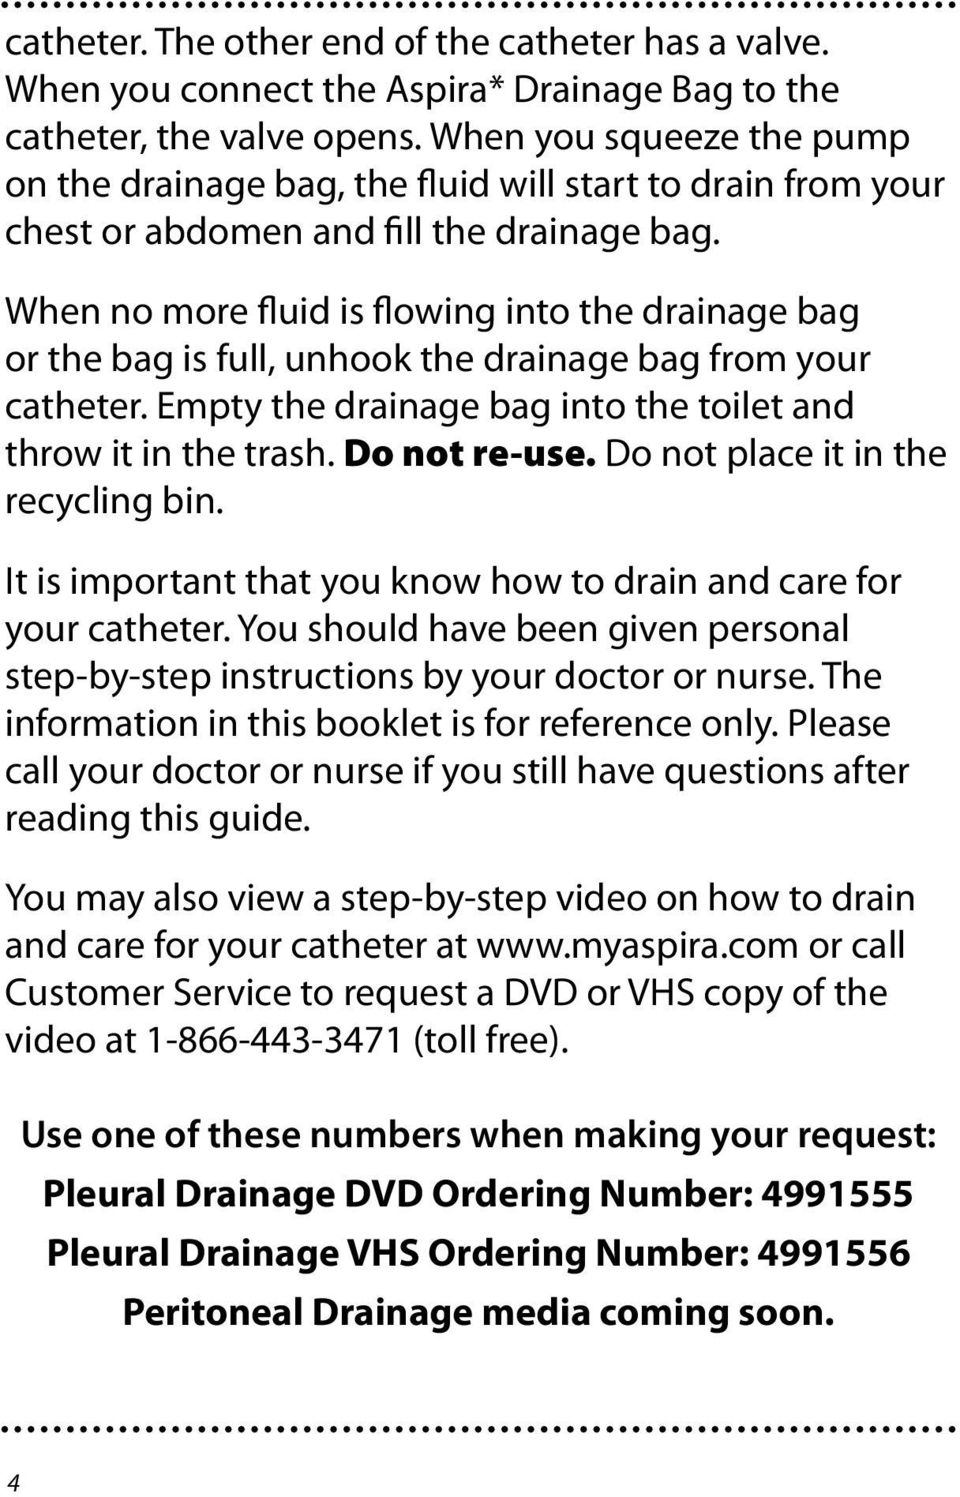 When no more fluid is flowing into the drainage bag or the bag is full, unhook the drainage bag from your catheter. Empty the drainage bag into the toilet and throw it in the trash. Do not re-use.